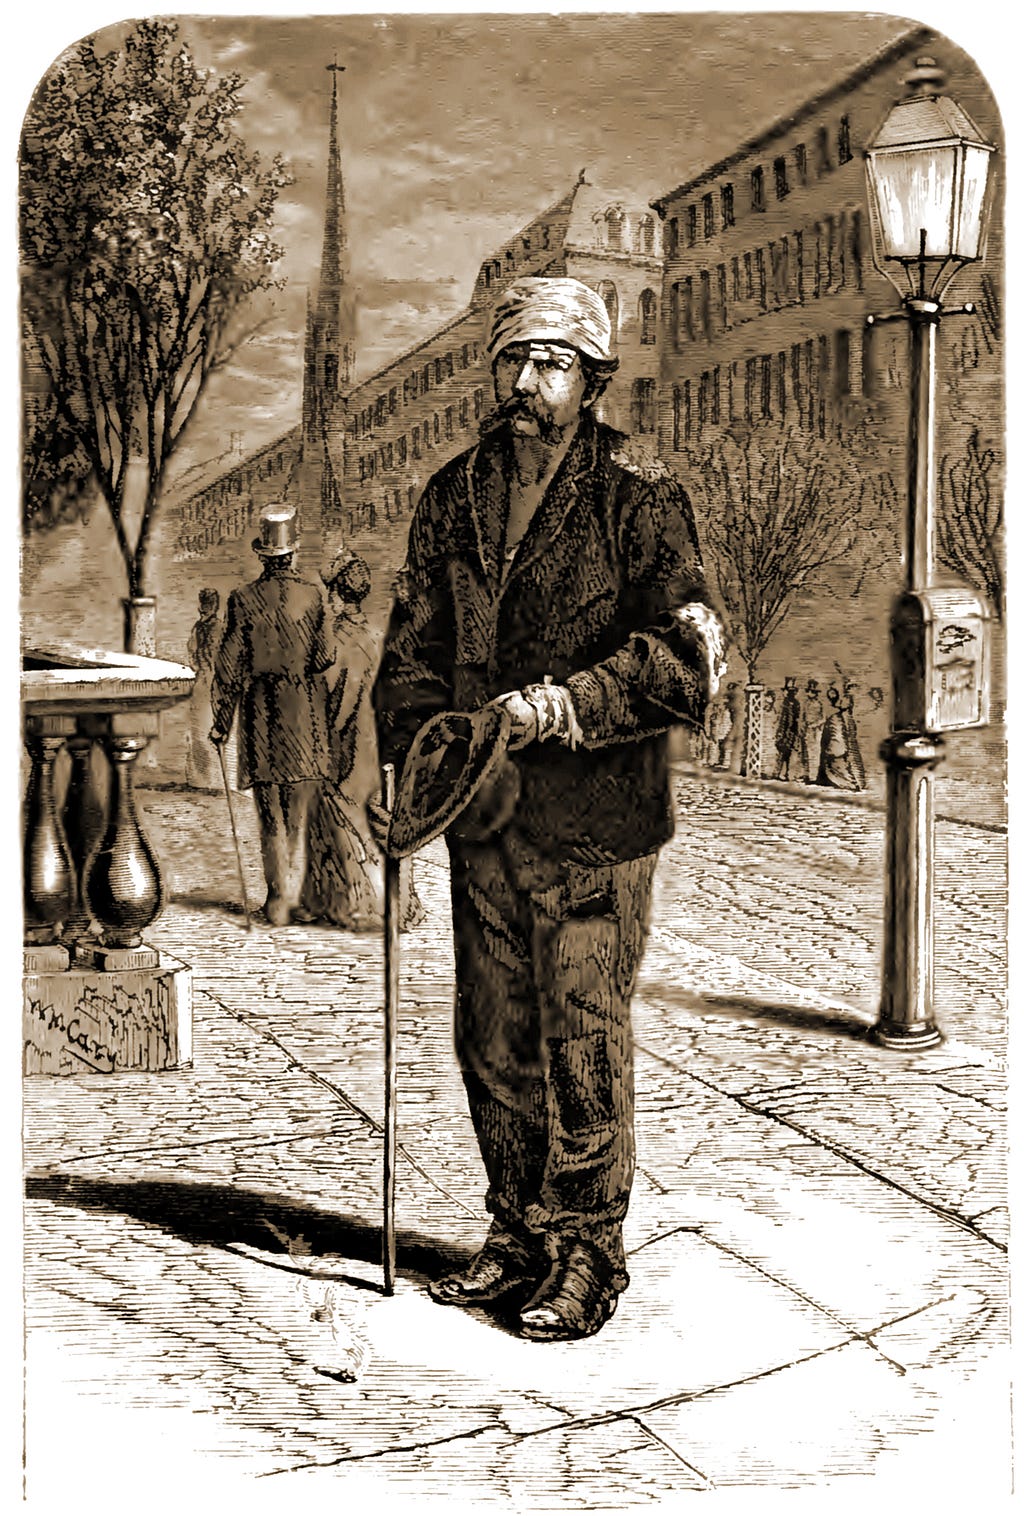 Arthur Pember as the Amateur Vagabond, adapted from Mysteries and Miseries, 1874